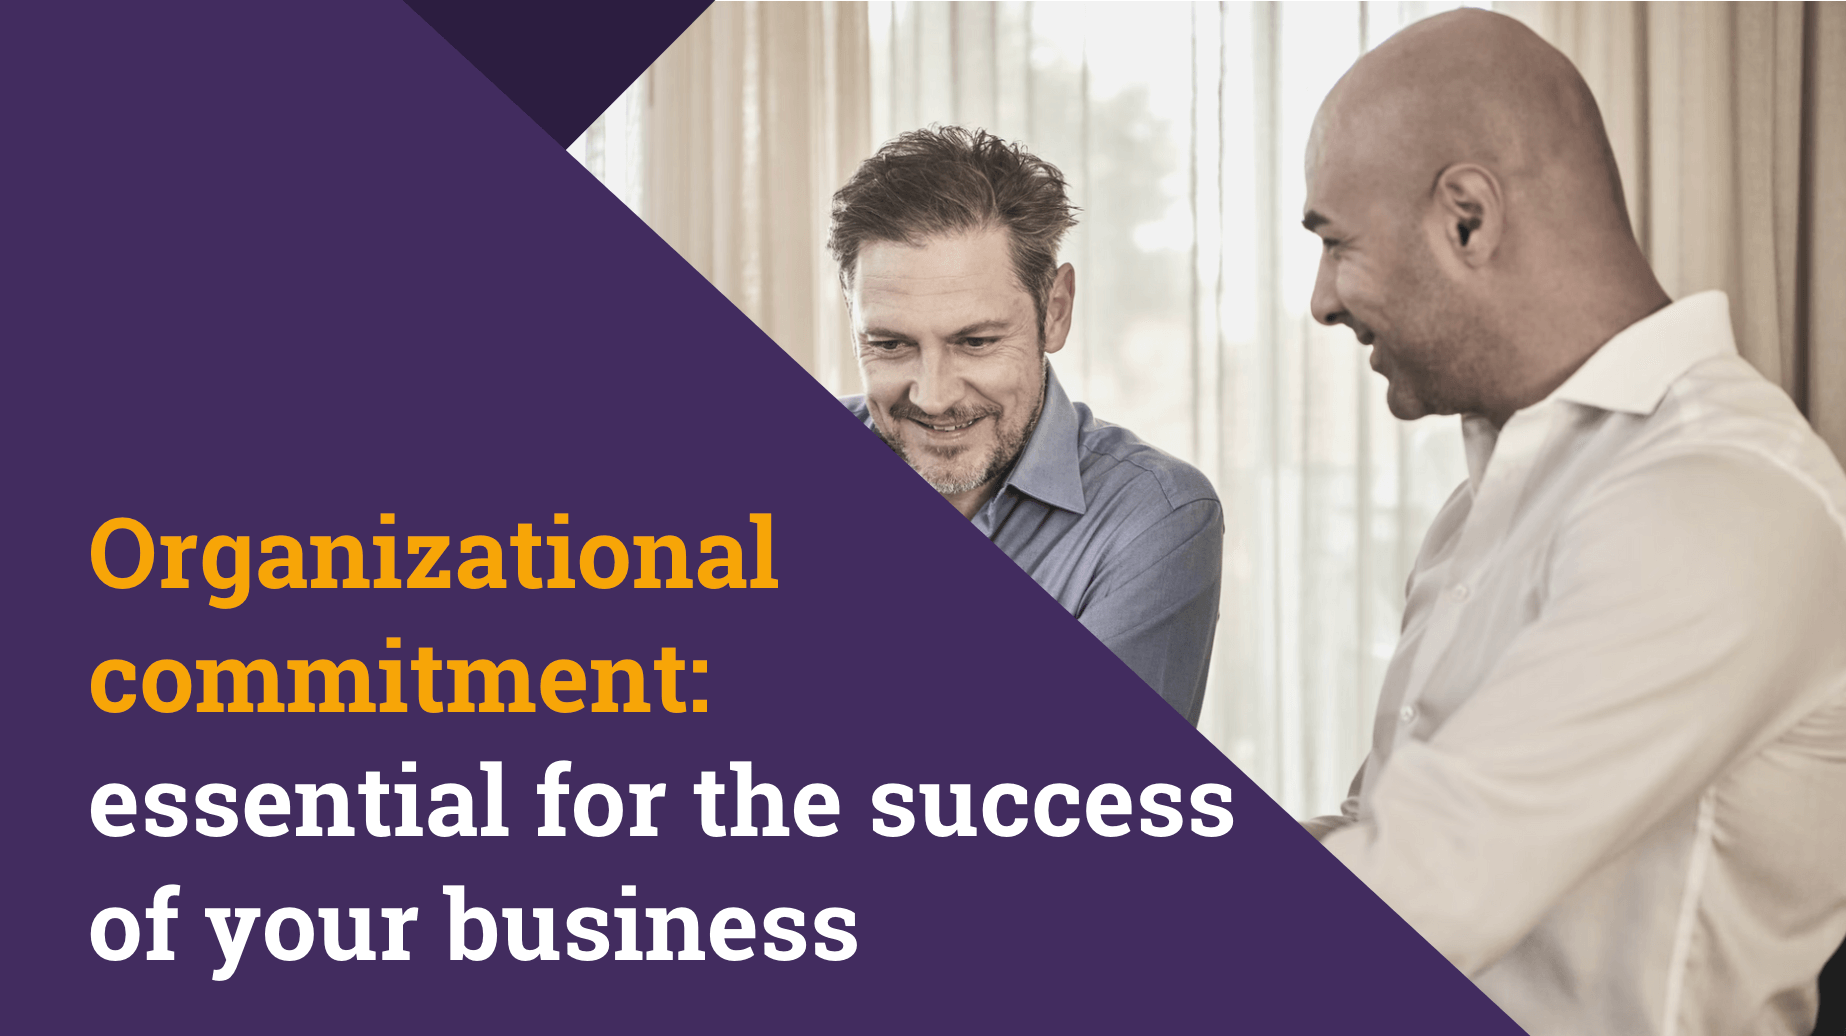 Organizational commitment: essential for the success of your business